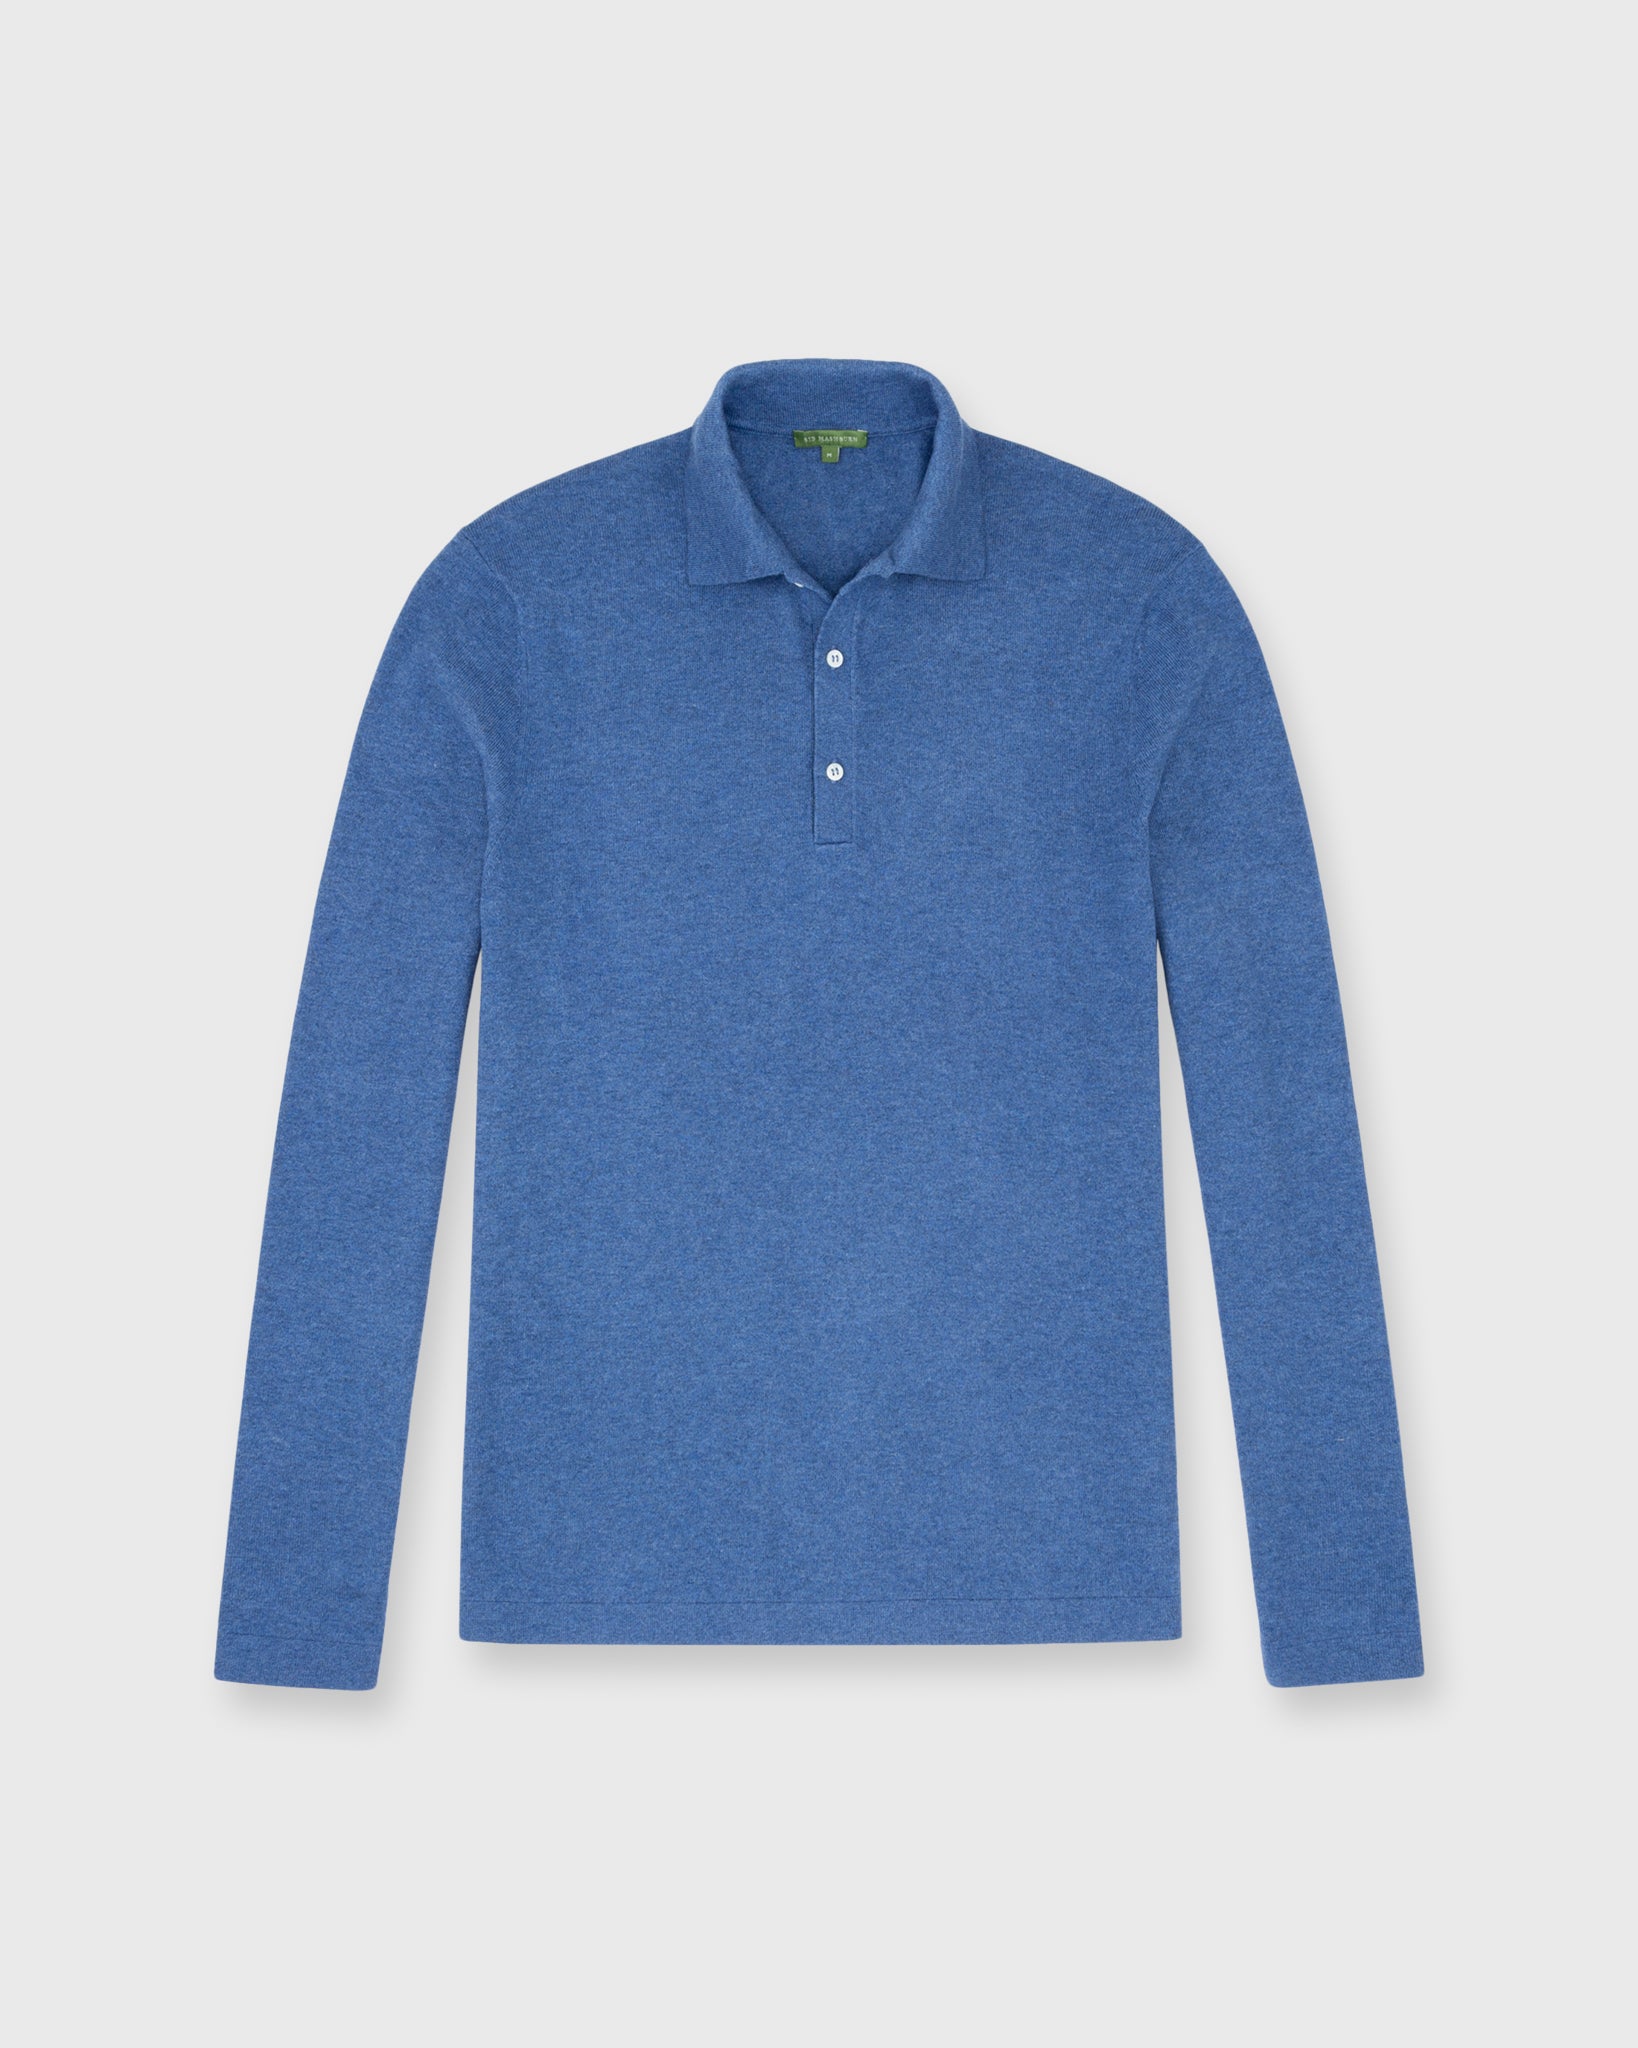 Long-Sleeved Rally Polo Sweater in Harbour Blue Cotton/Cashmere